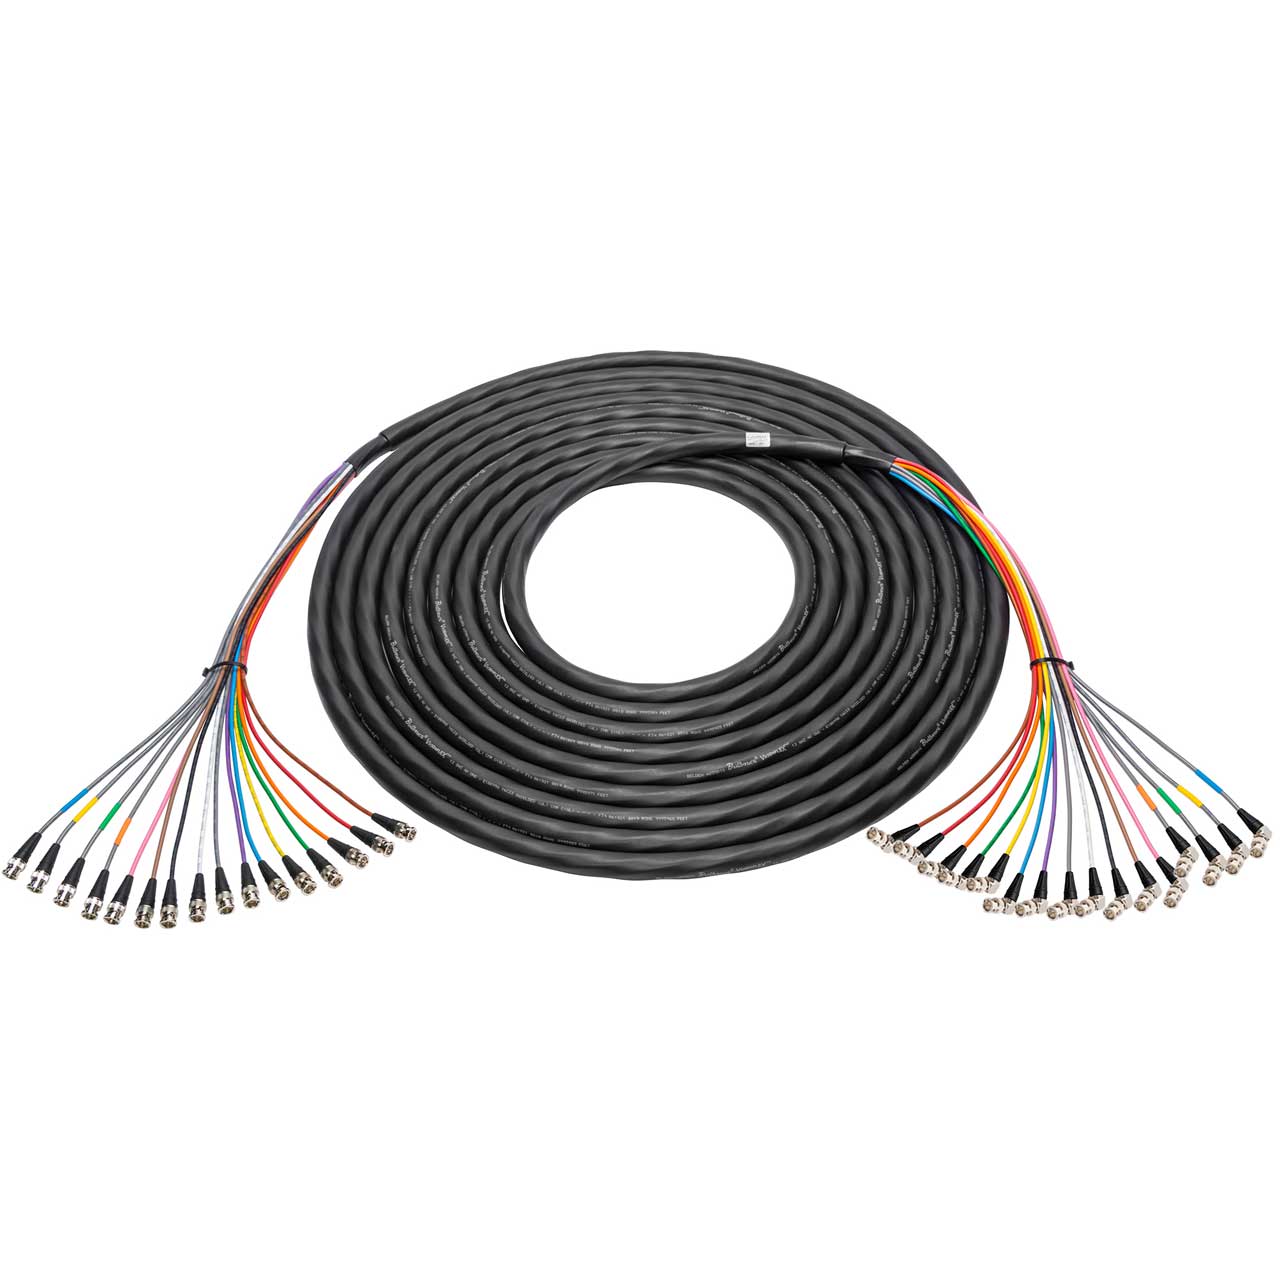 Laird 4855R16-BBA-025 16-Channel 12G-SDI/4K UHD BNC Male to Right Angle BNC Male Snake Cable - 25 Foot 4855R16-BBA-025